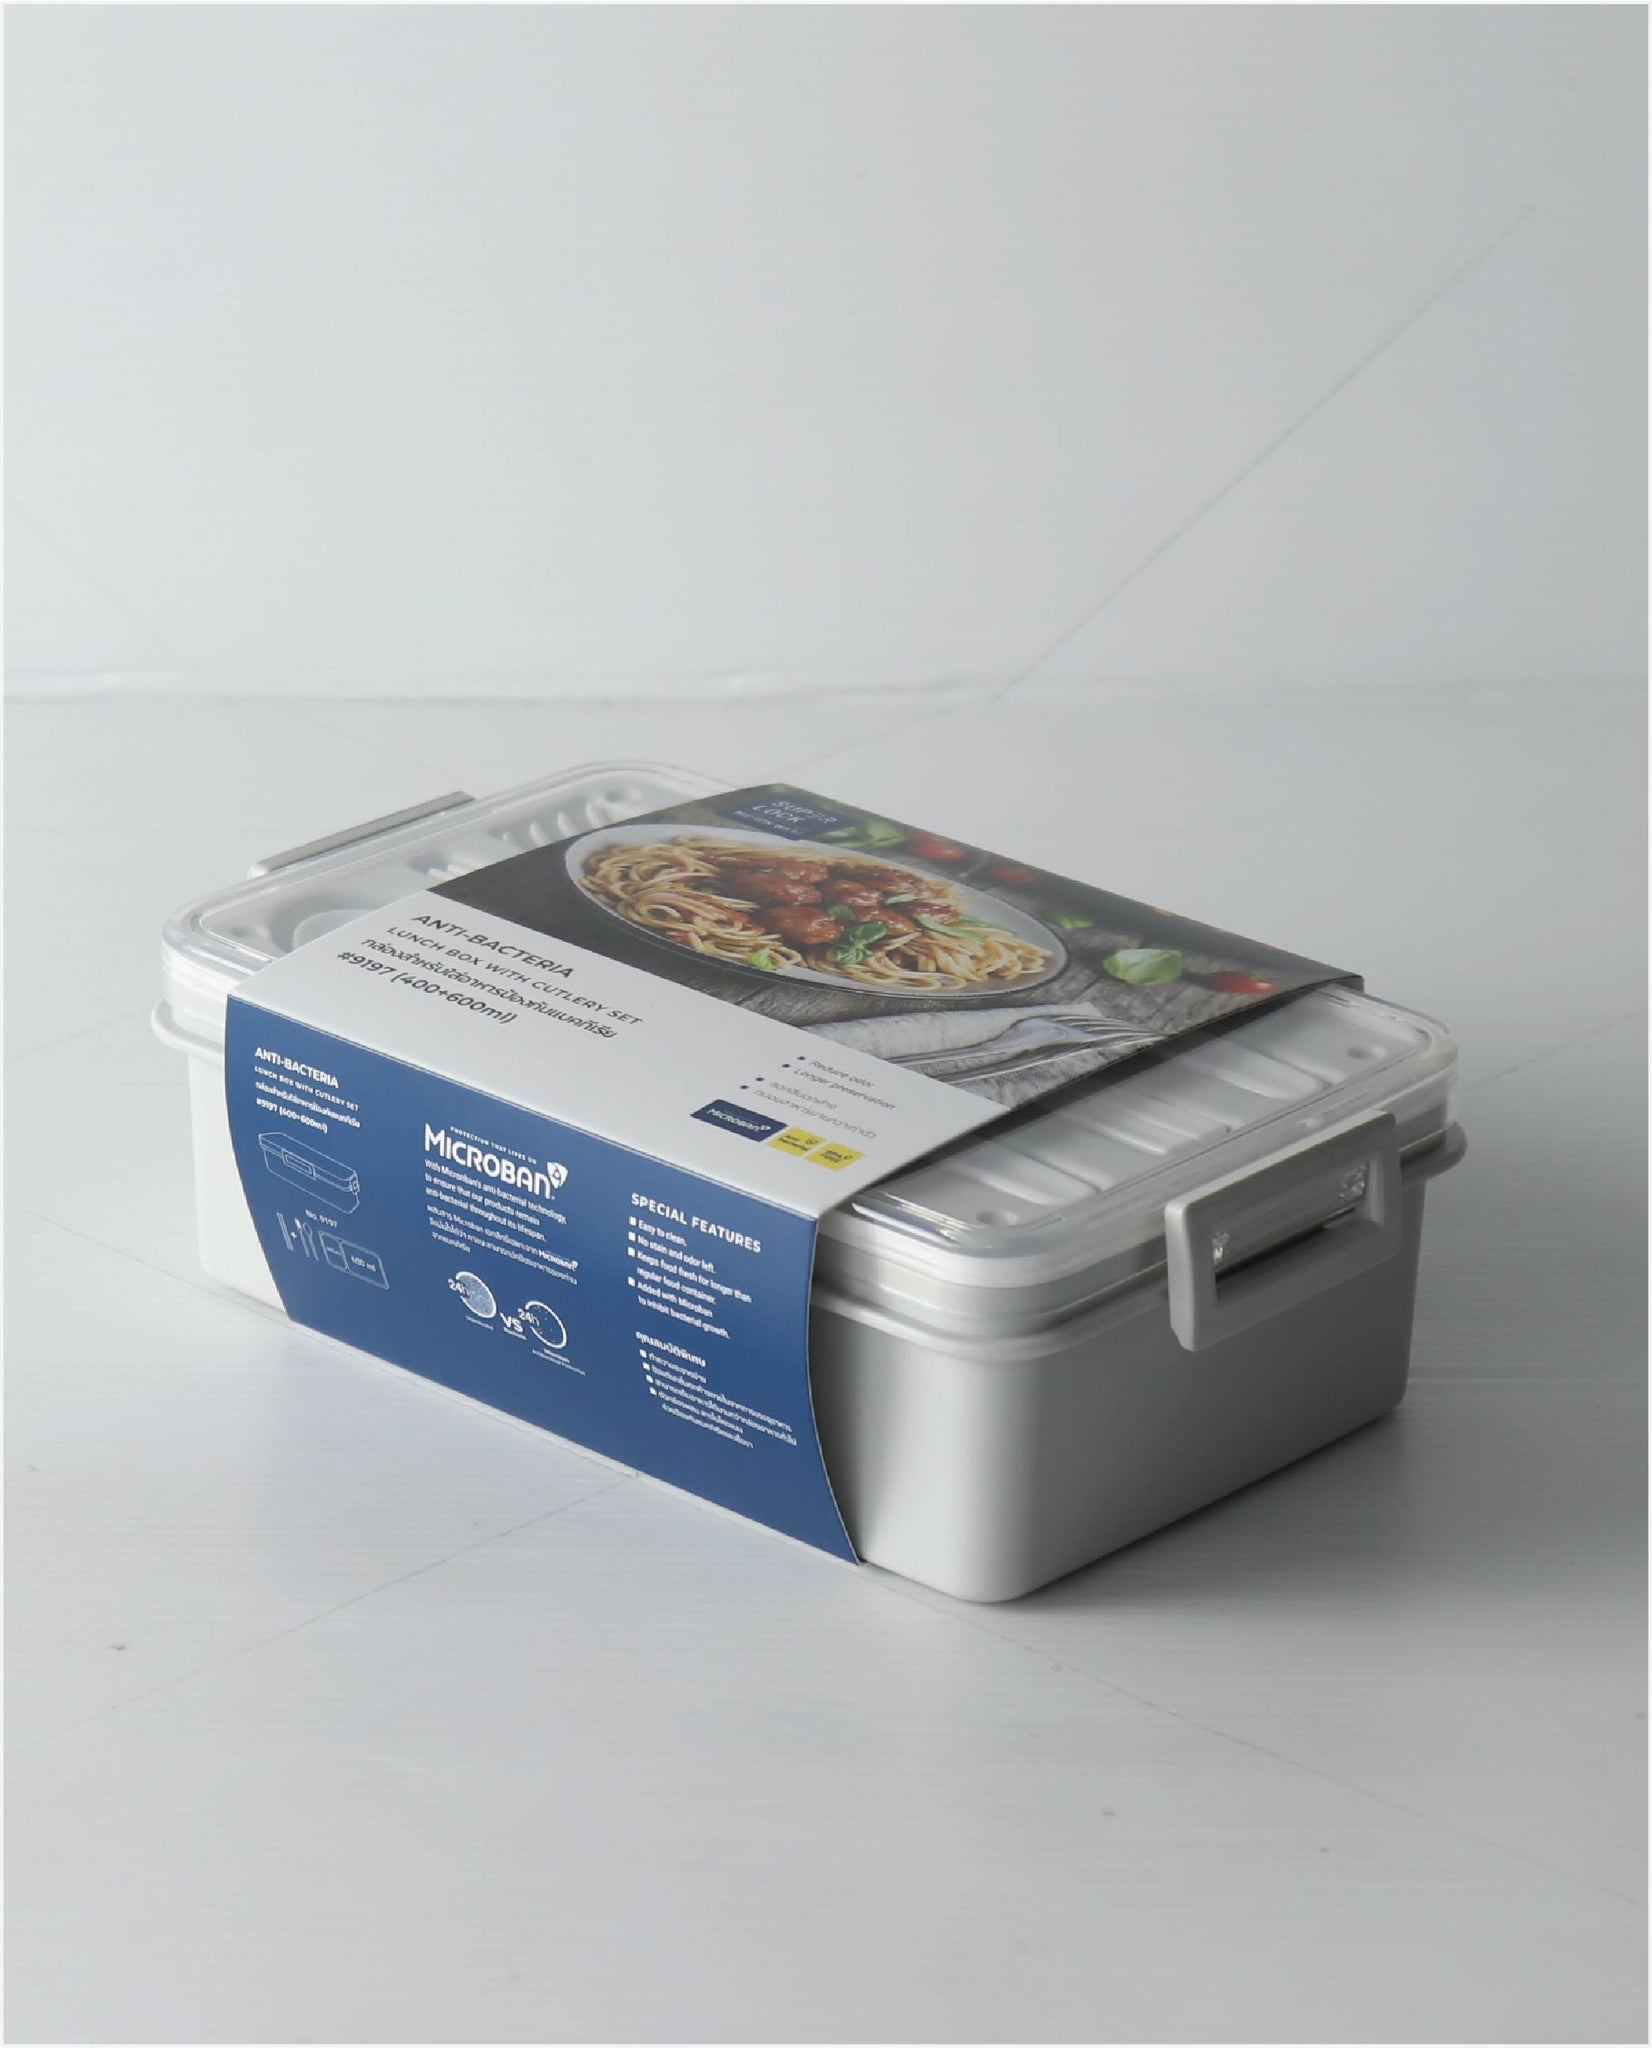 MSCshoping 9197 Lunch Box 1,000 ml.  (Made to order)